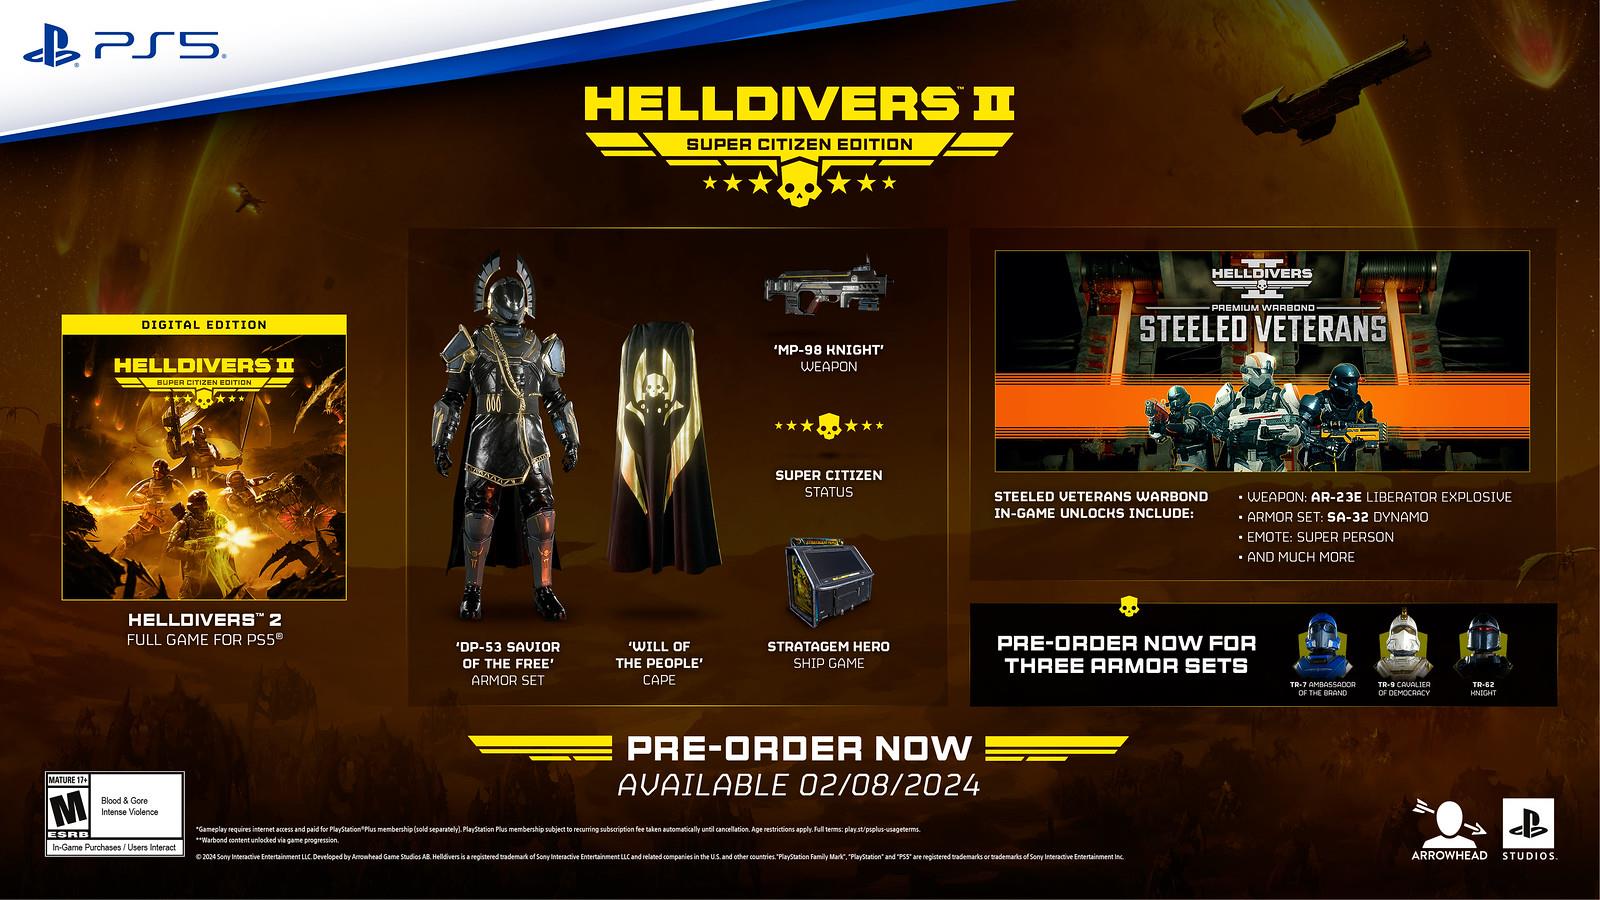 Helldivers 2 launches for PS5 and PC on February 8th - Gaming Nexus